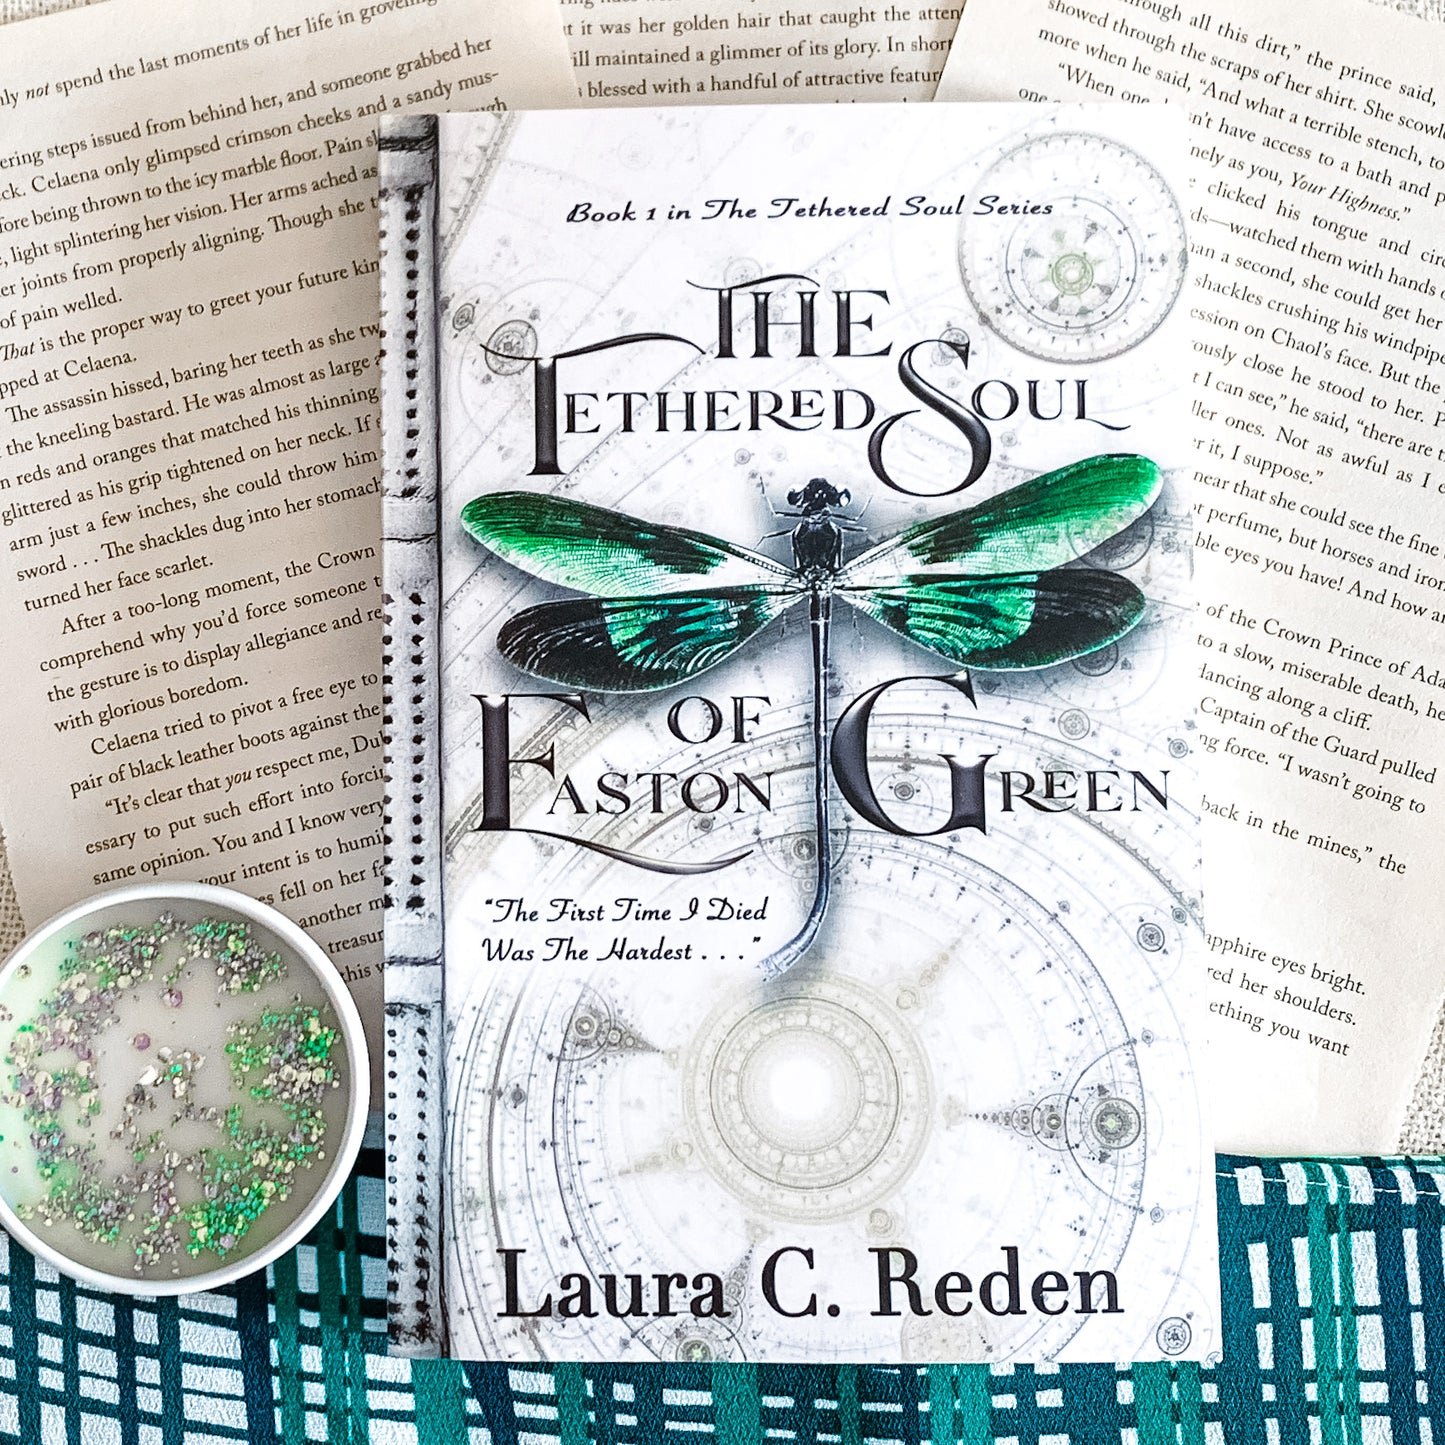 The Tethered Soul Series by Laura C. Reden